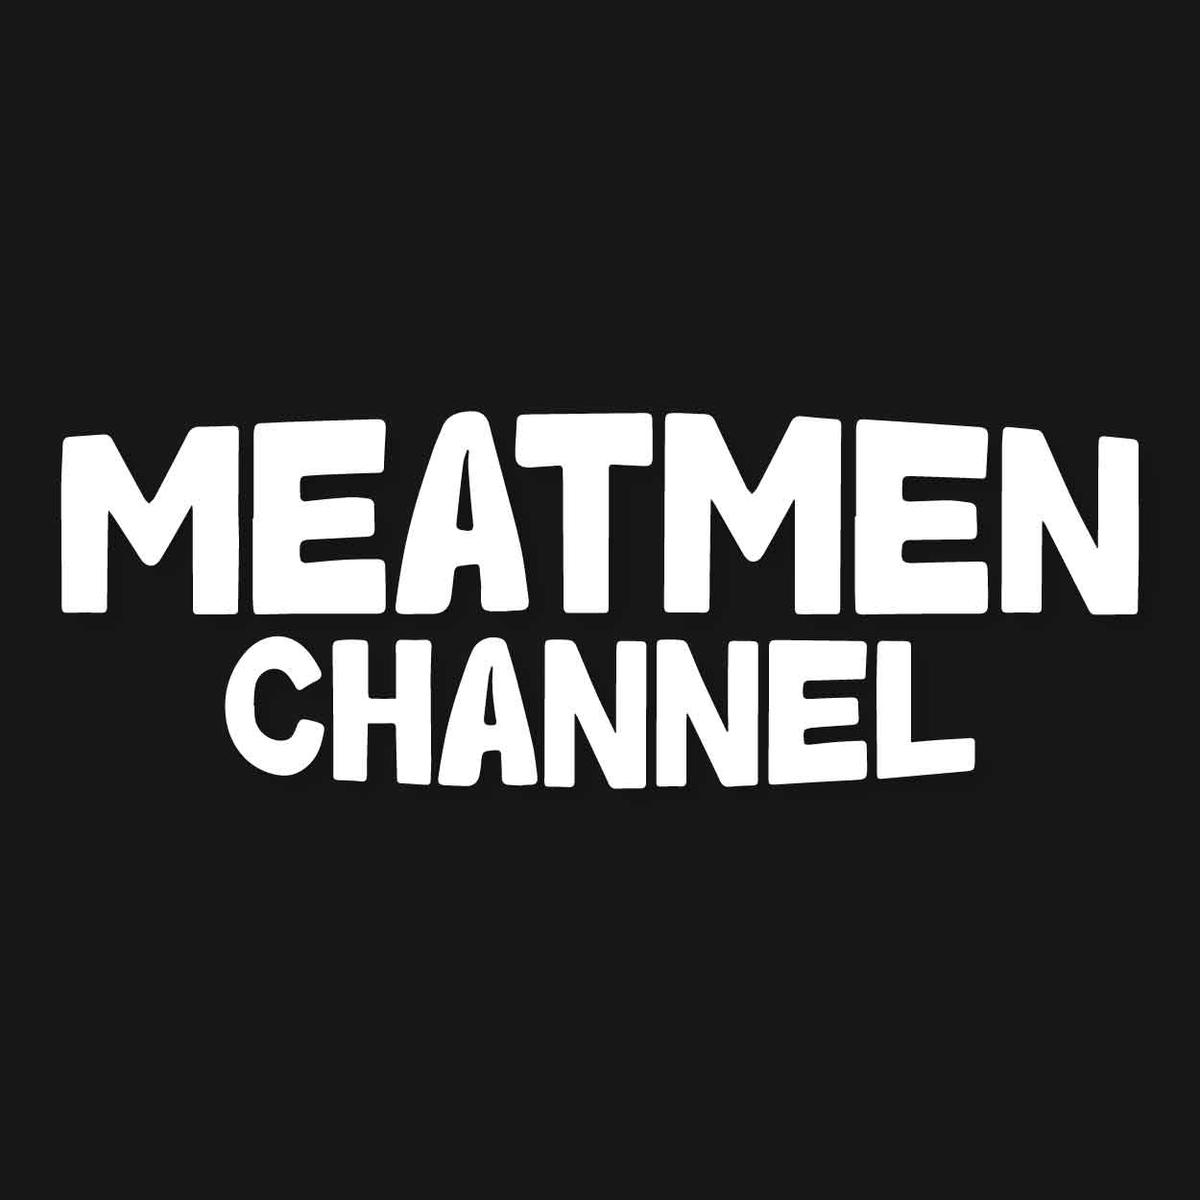 The Meatmen's images